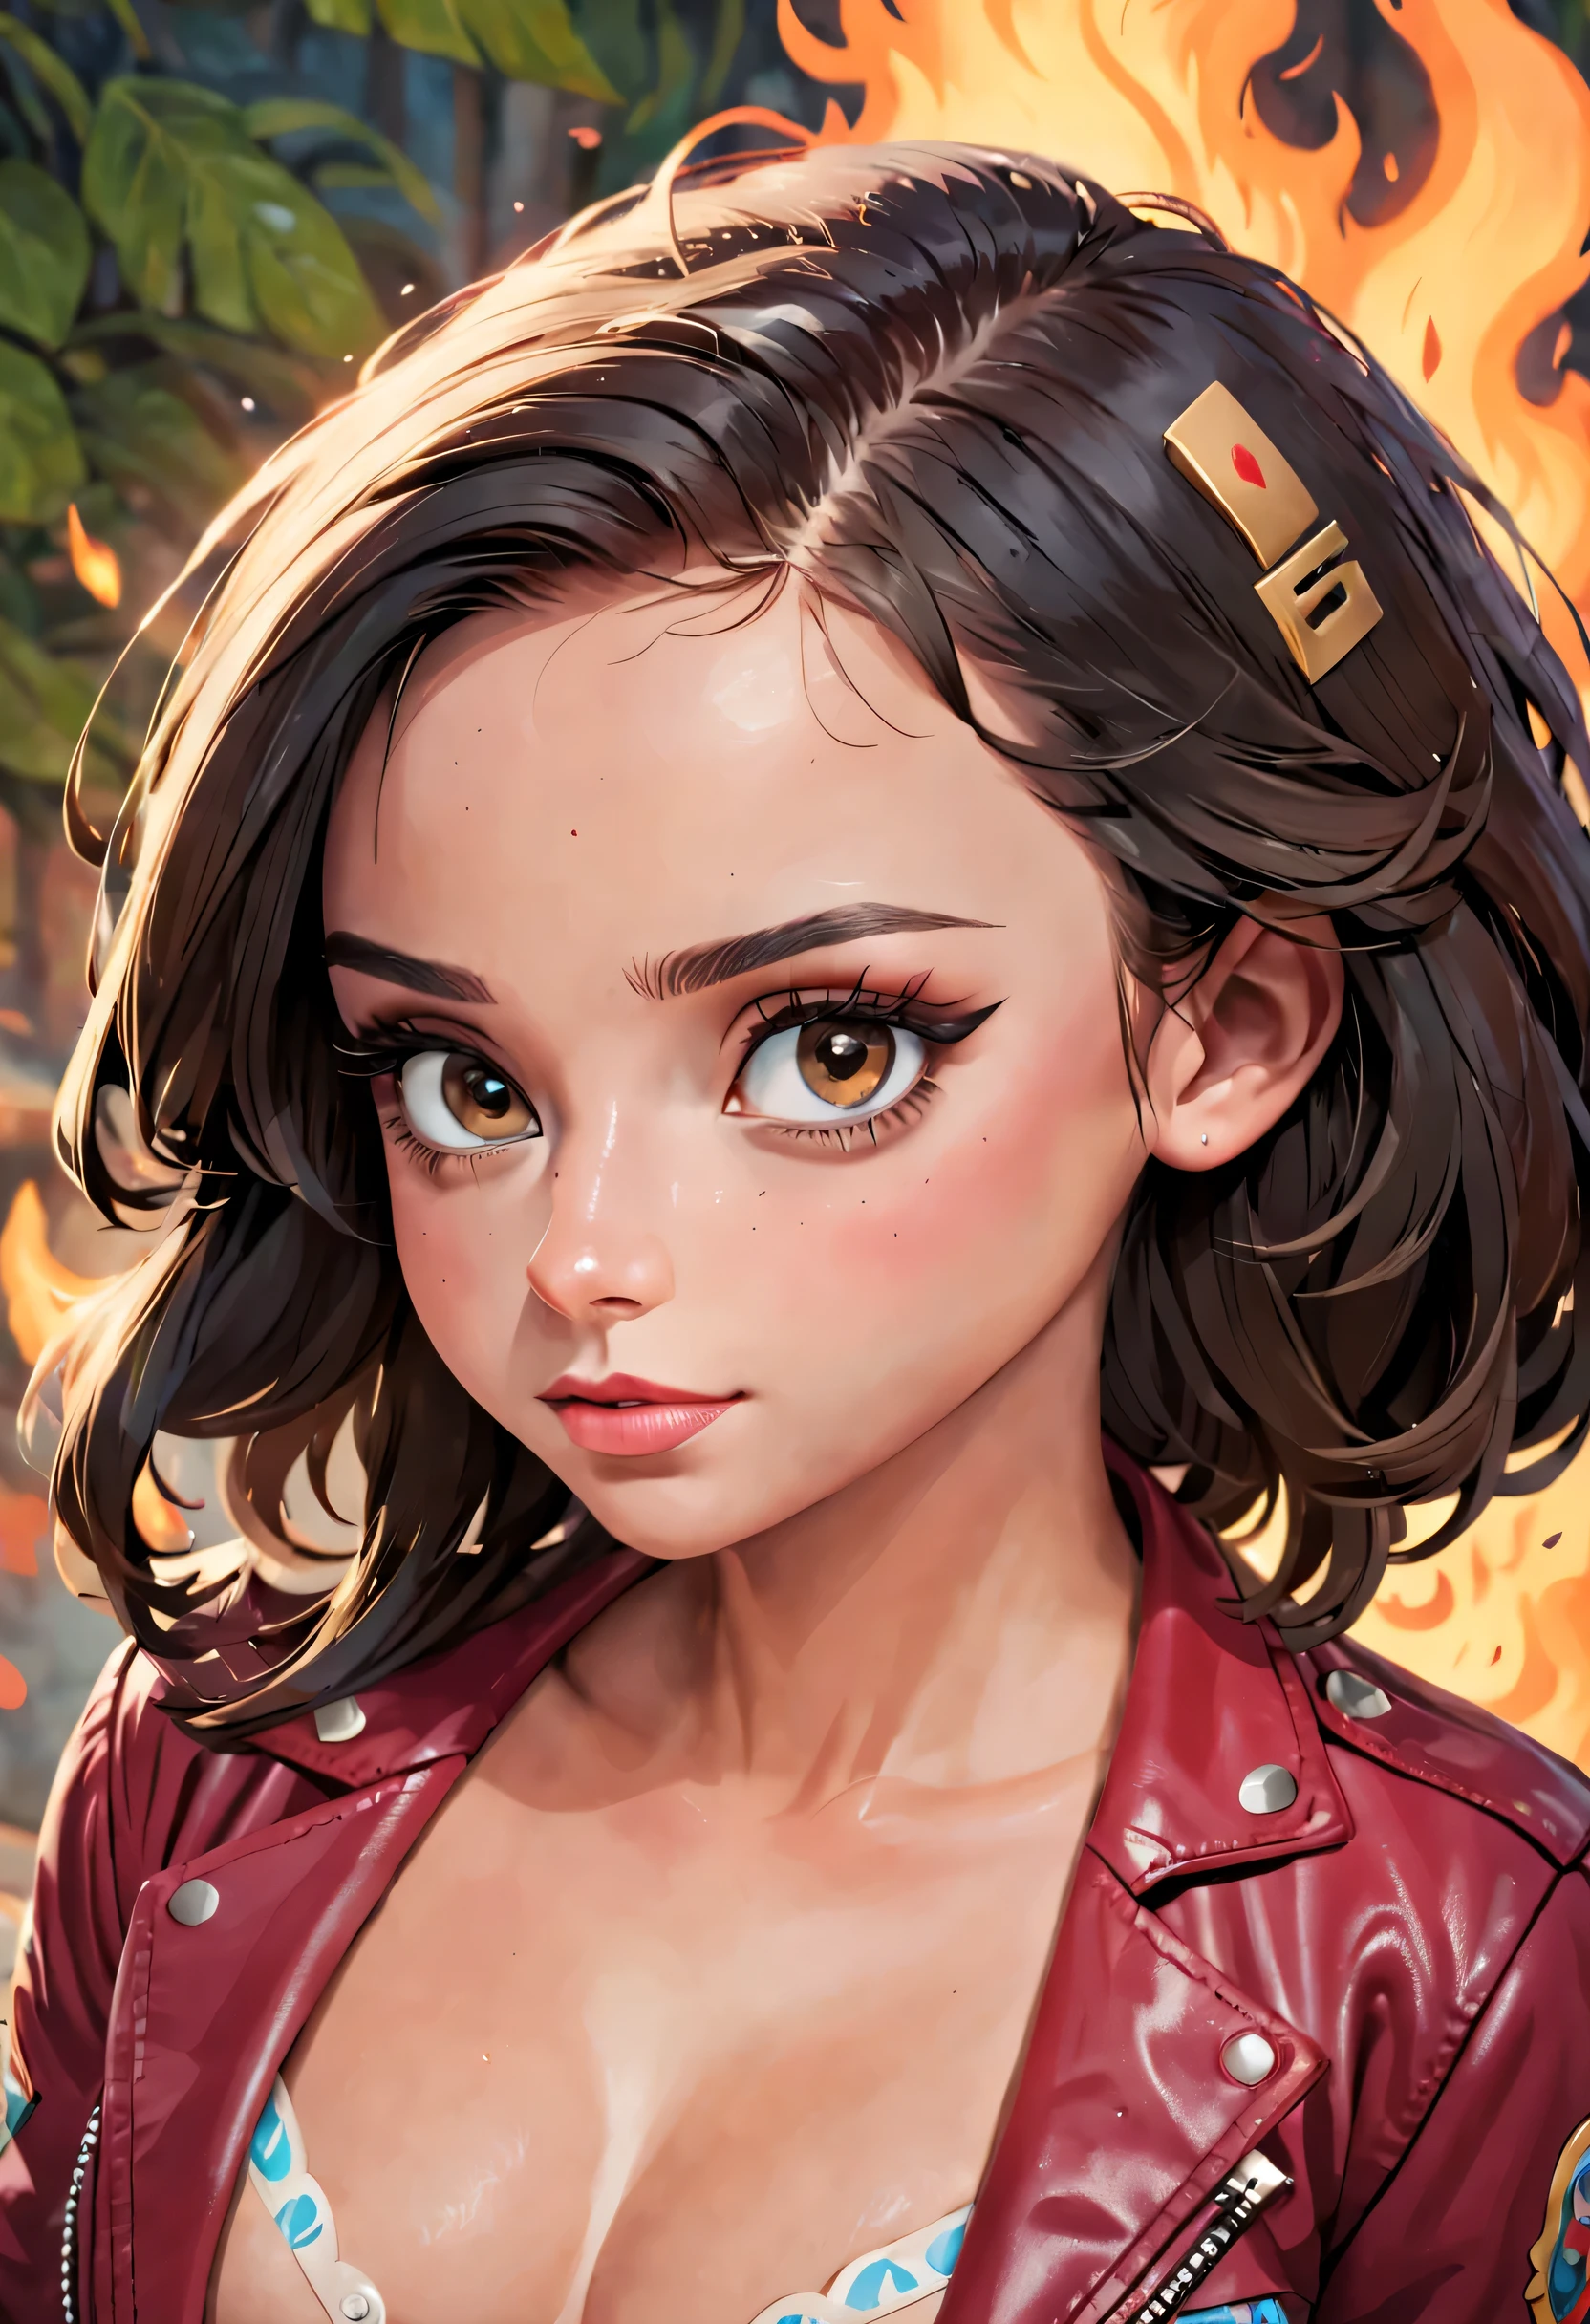 (best quality,highres,masterpiece:1.2),ultra-detailed,realistic eyes,beautiful detailed lips,extremely detailed eyes and face,long eyelashes,Brie Larson-esque face:1.1,aspects of Selena Gomez, Vanessa Hudgens, and Hailee Steinfeld:1.1,Colombian body:1.1,erotic clothing,pin-up style,attractive pose, standing, wearing a red leather jacket with fire symbols, professional lighting,lush background,artistic composition,vibrant colors.